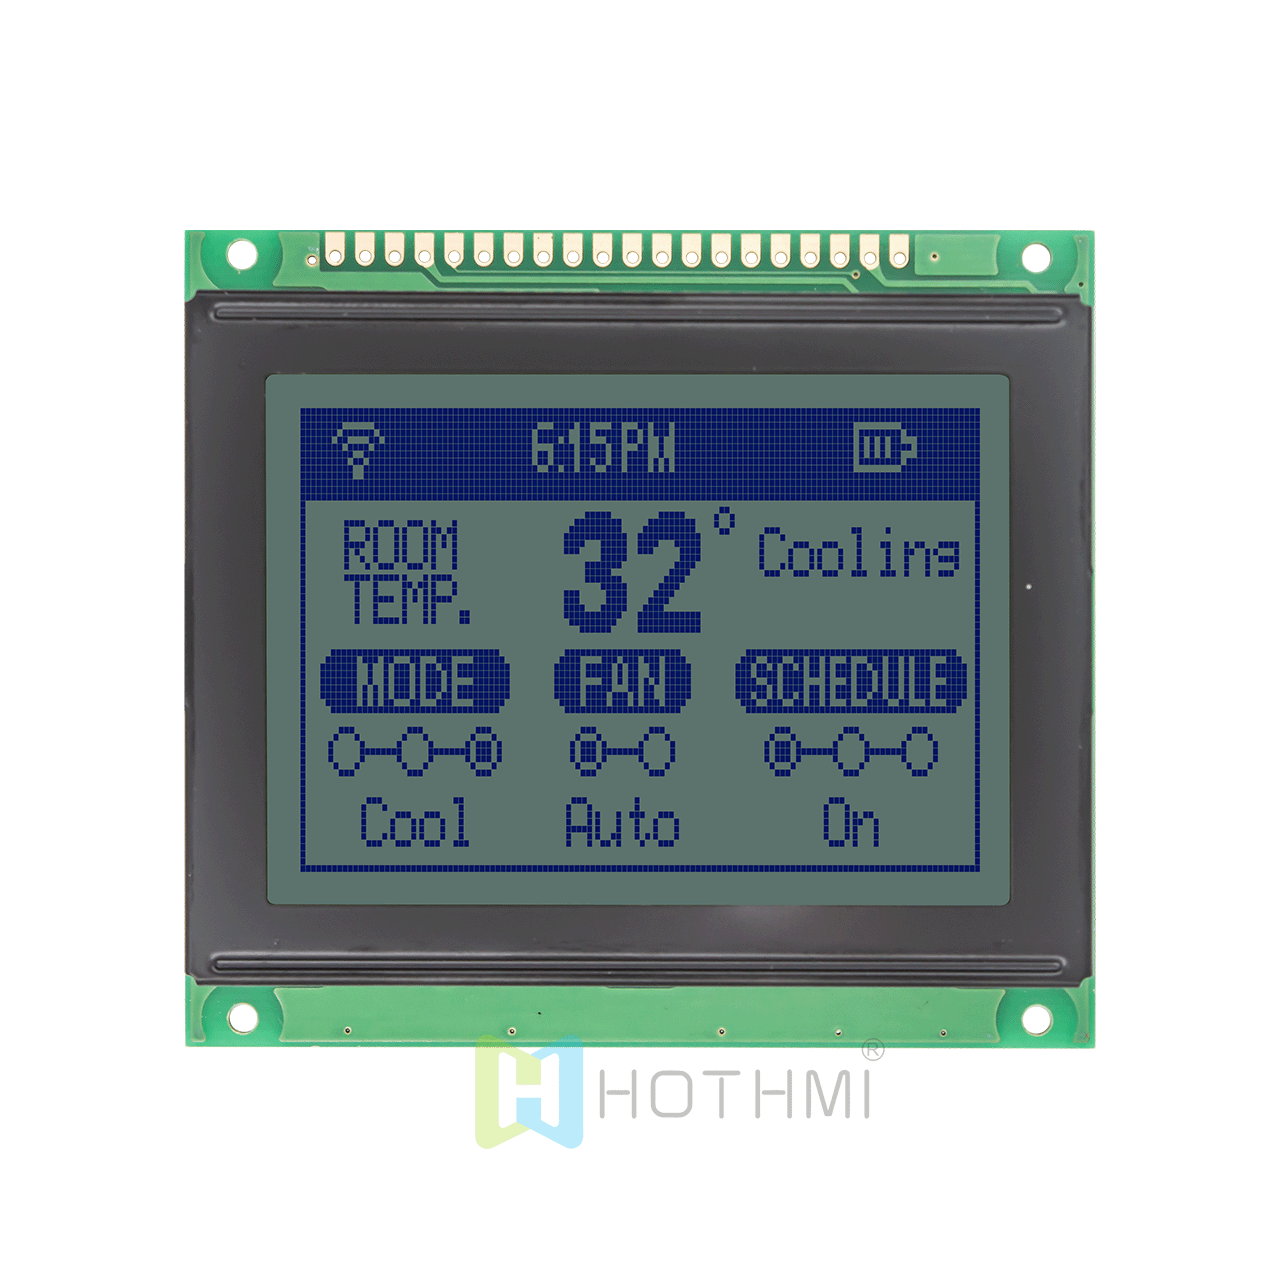 3" 128x64 LCD display | Graphic dot matrix display | Compatible with KS0108 | Blue text on gray background | Arduino